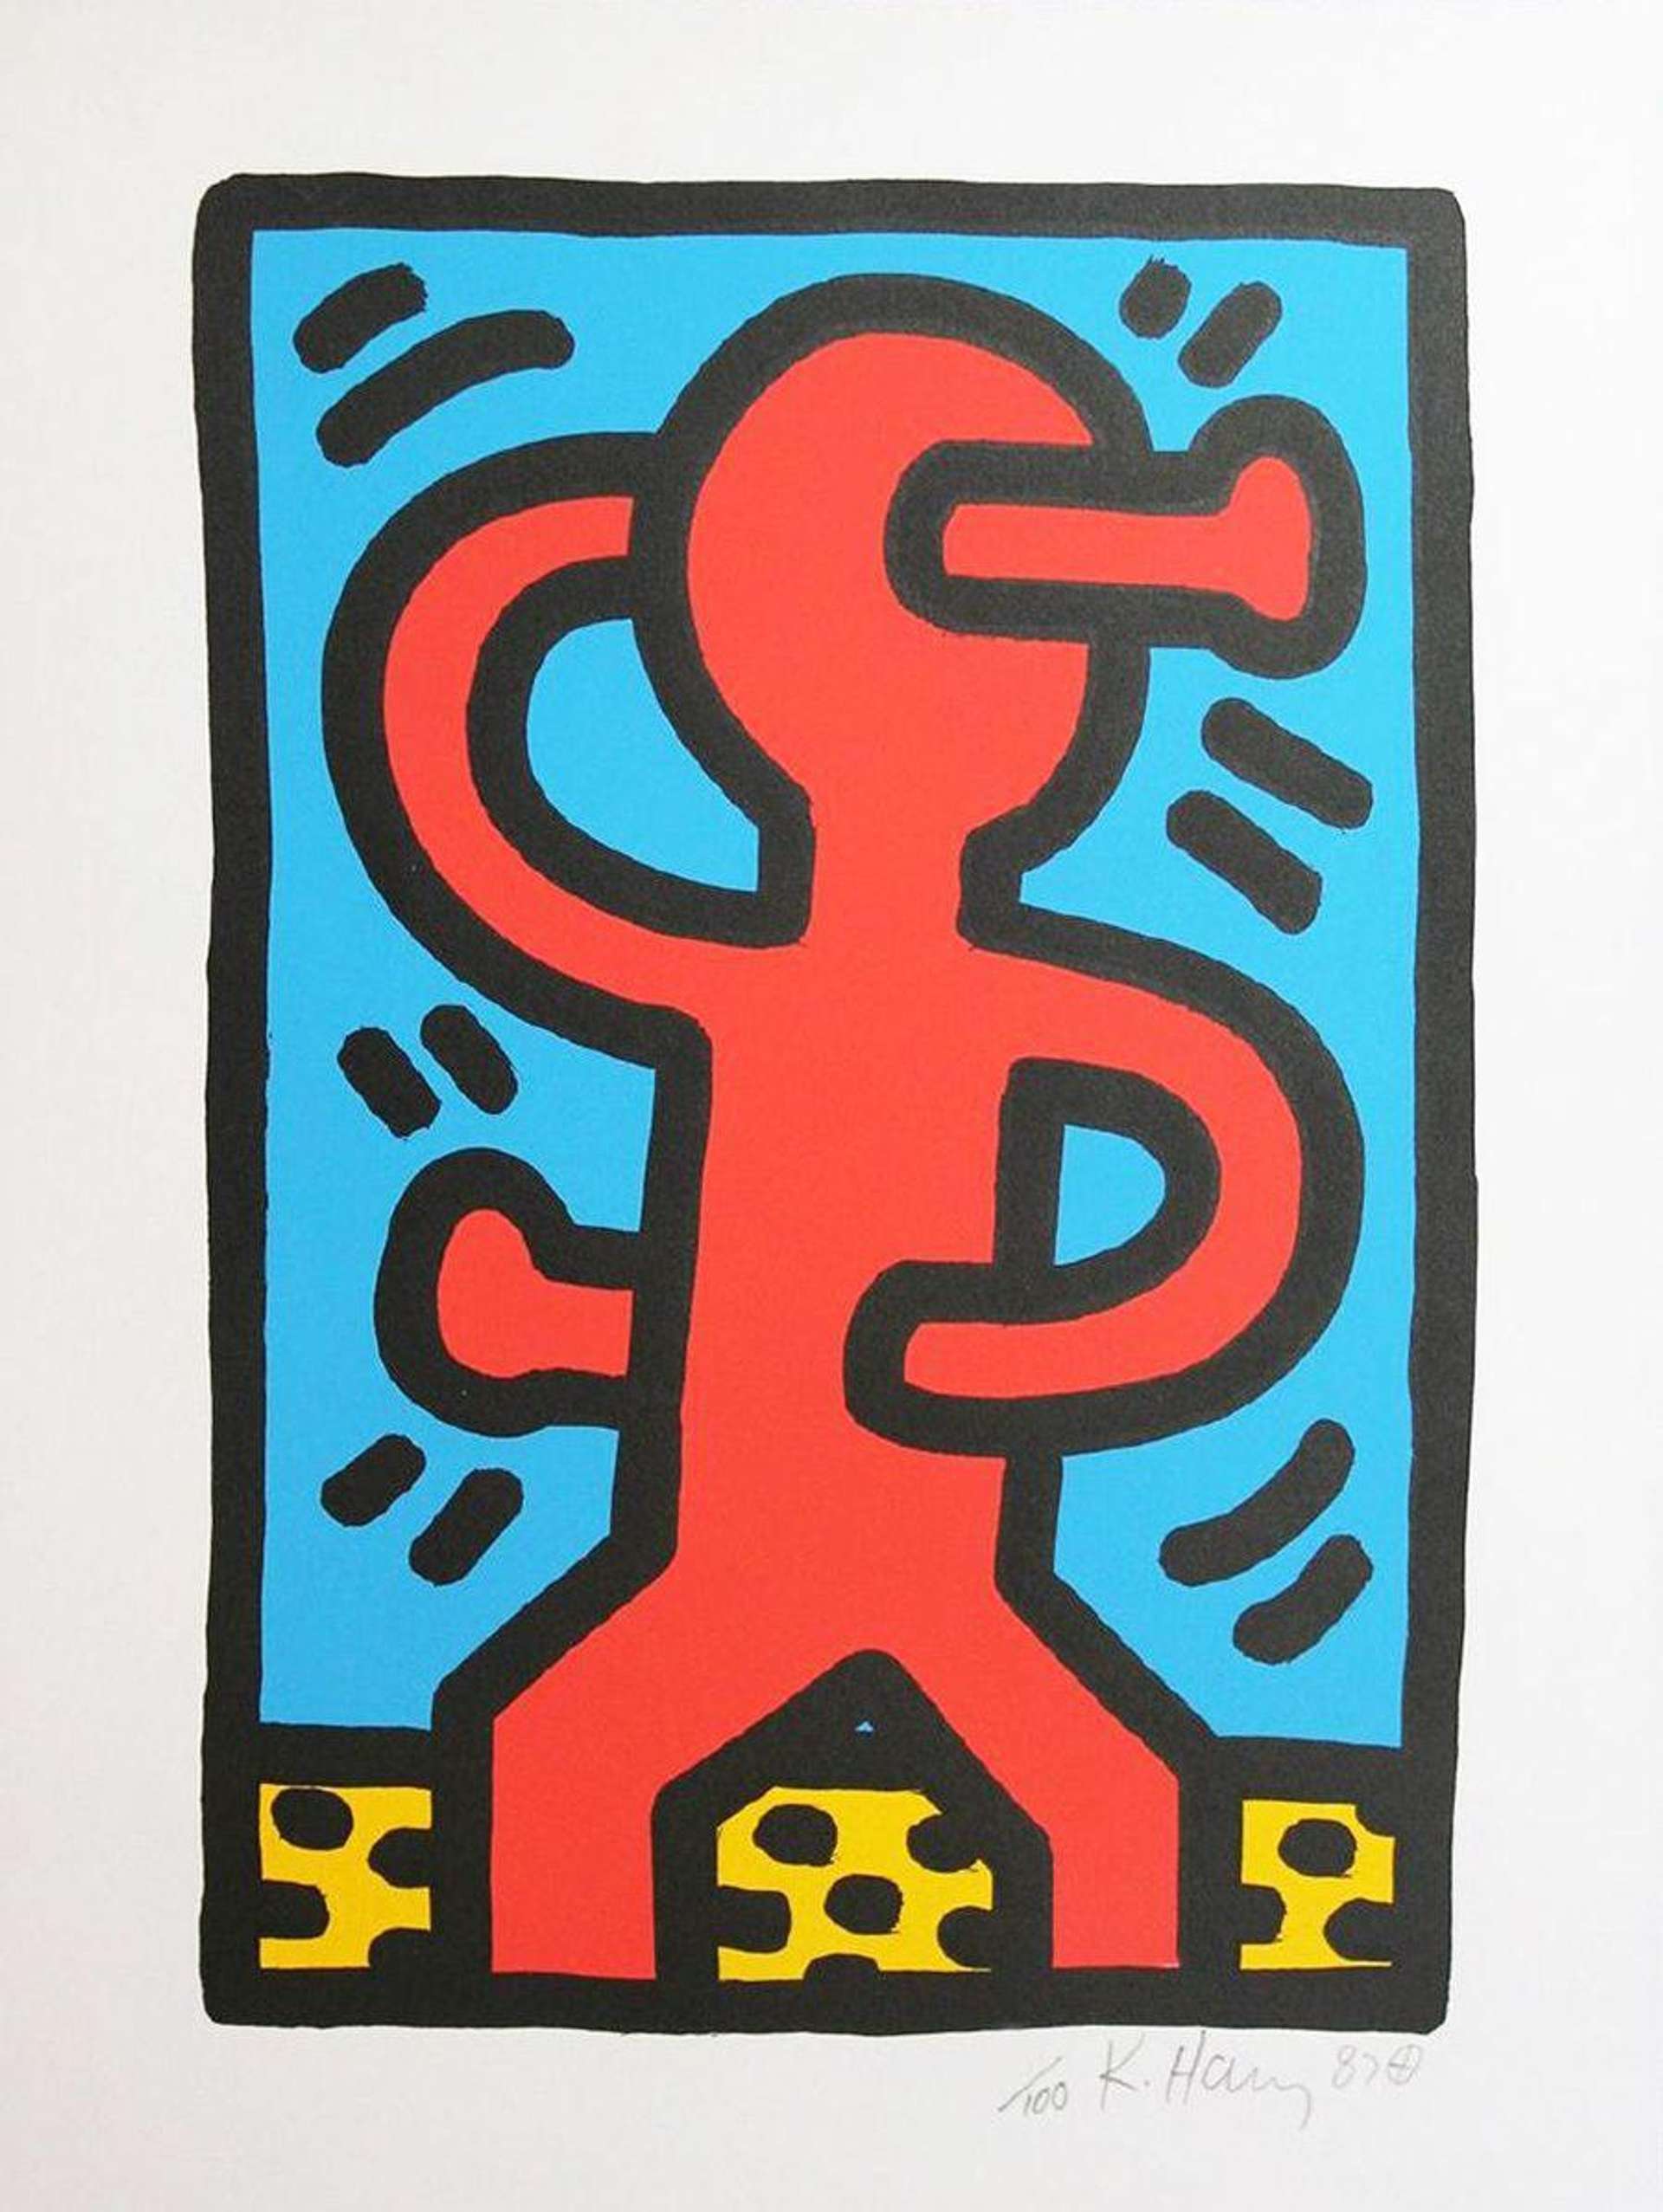 Untitled 1987 - Signed Print by Keith Haring 1988 - MyArtBroker